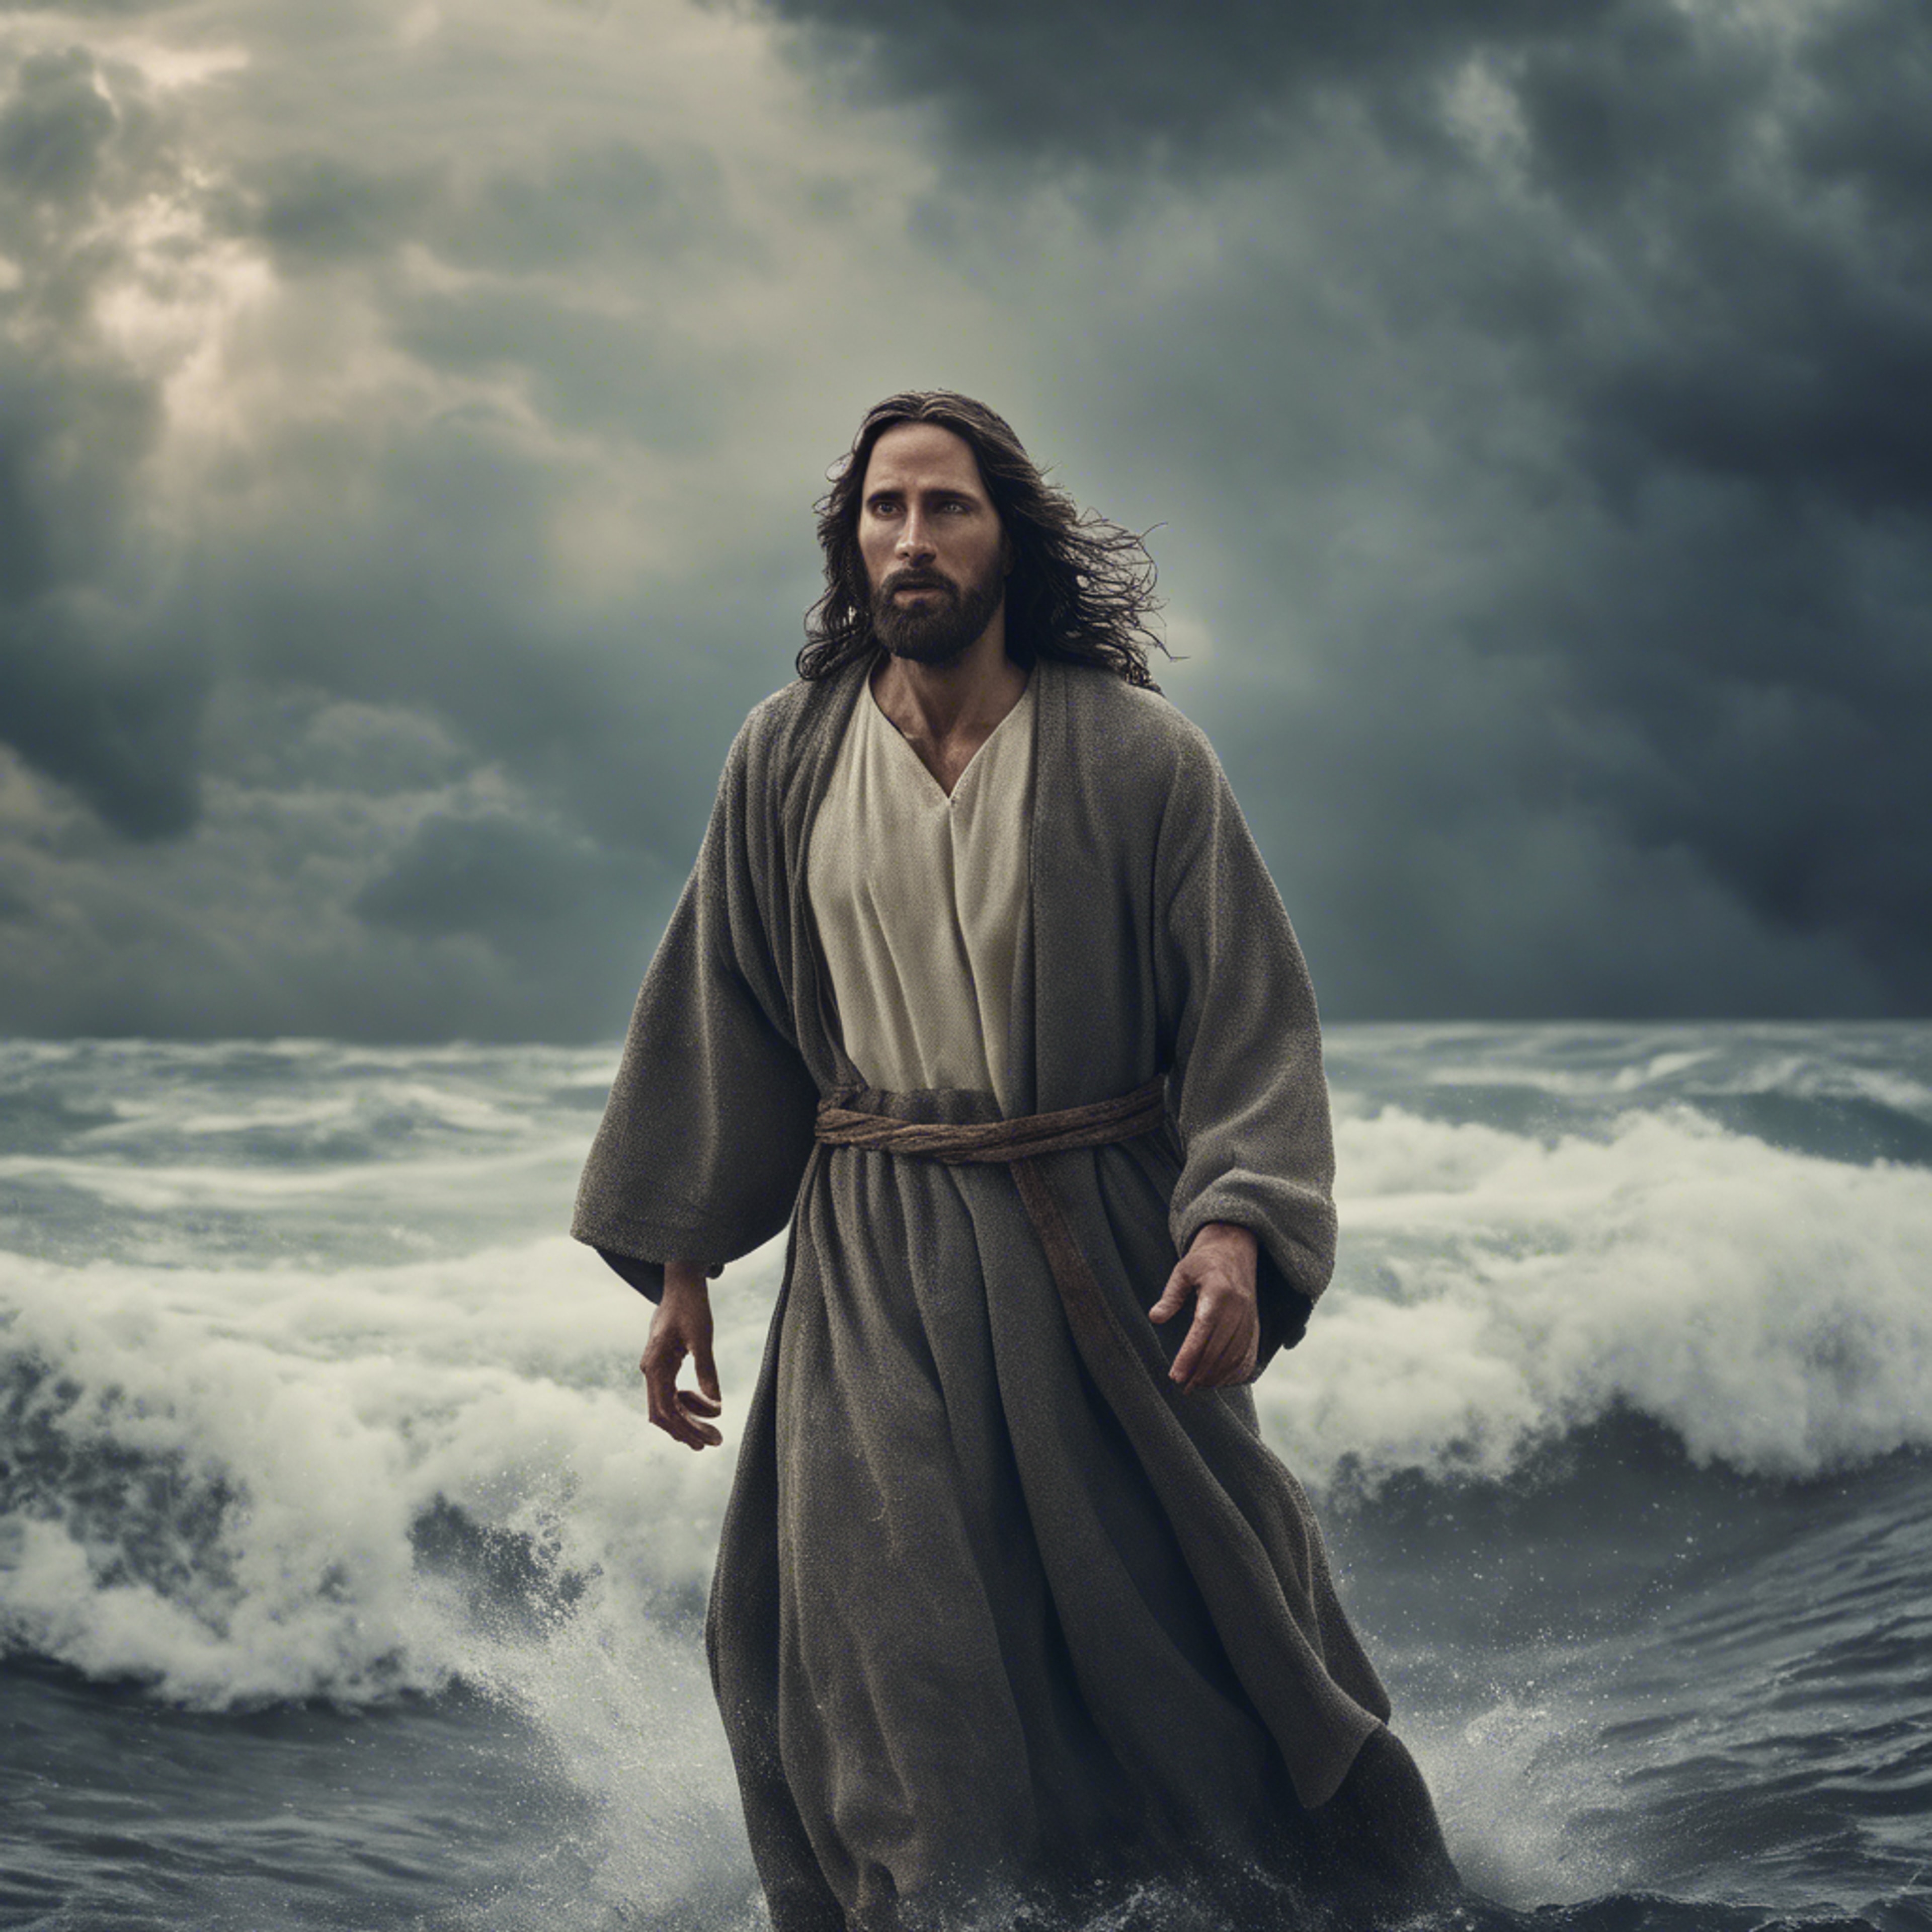 Jesus Christ calmly walking across a stormy sea under a dramatic, cloudy sky. Wallpaper[40d9c306725247569090]